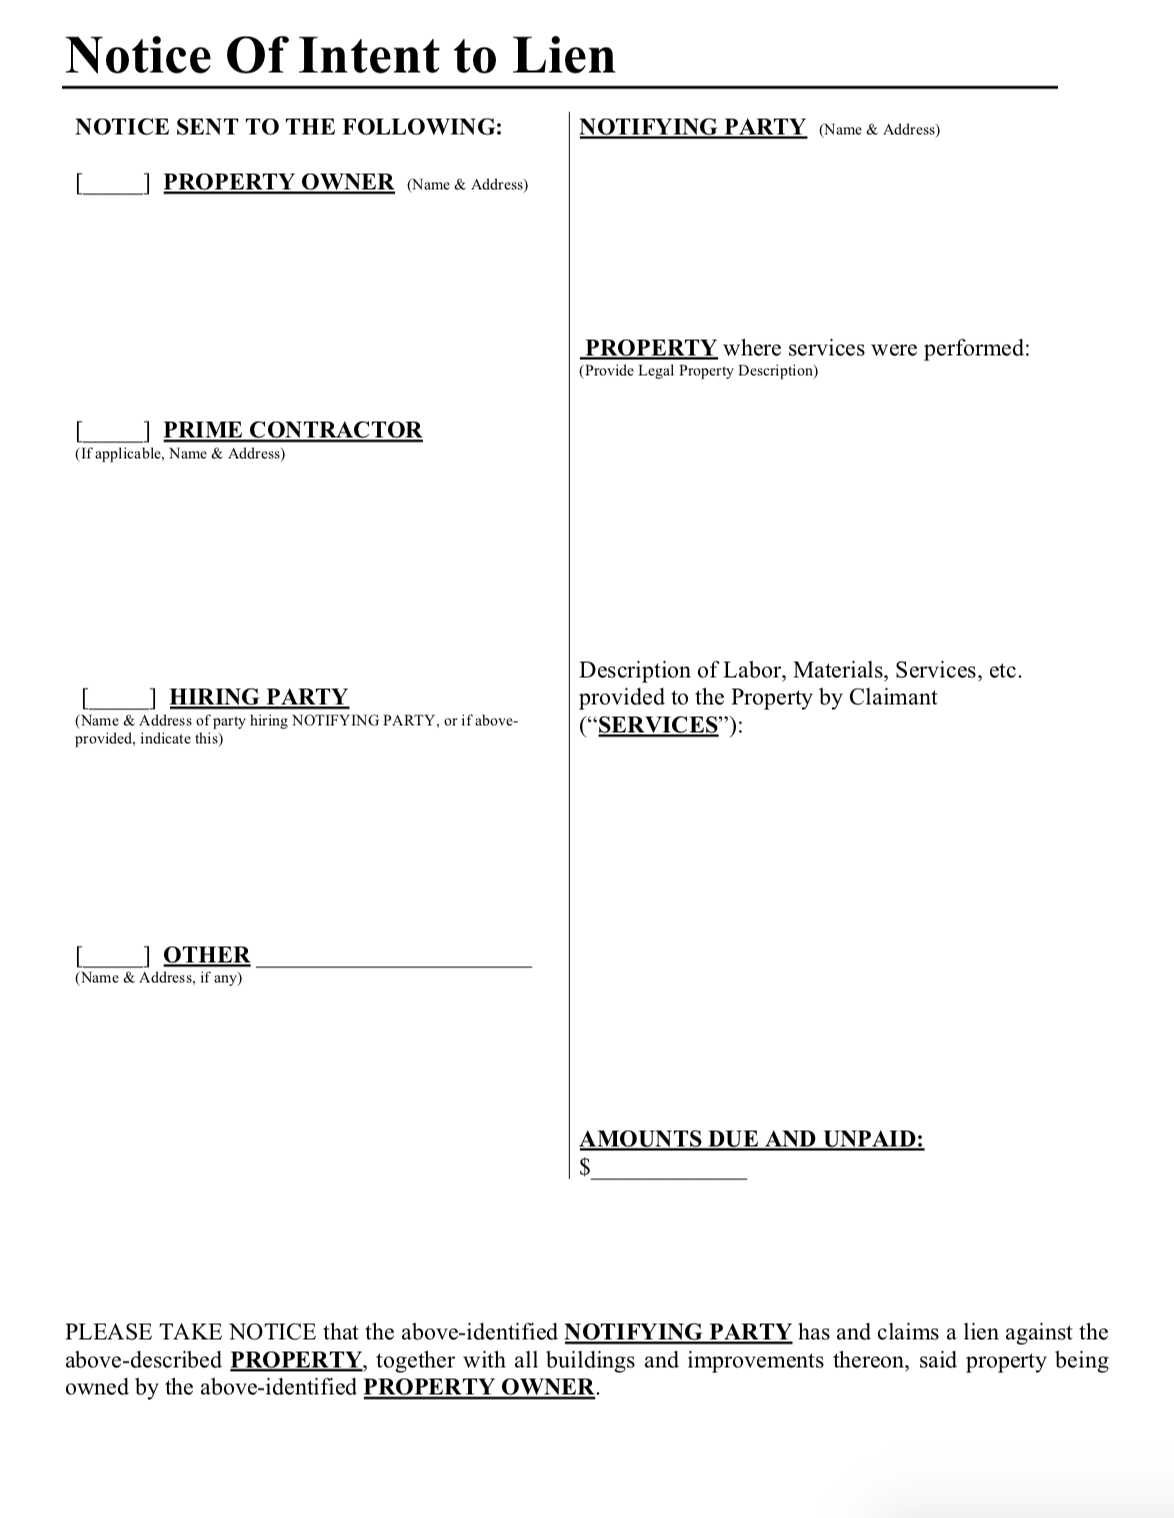 arkansas-notice-of-intent-to-lien-form-free-downloadable-template